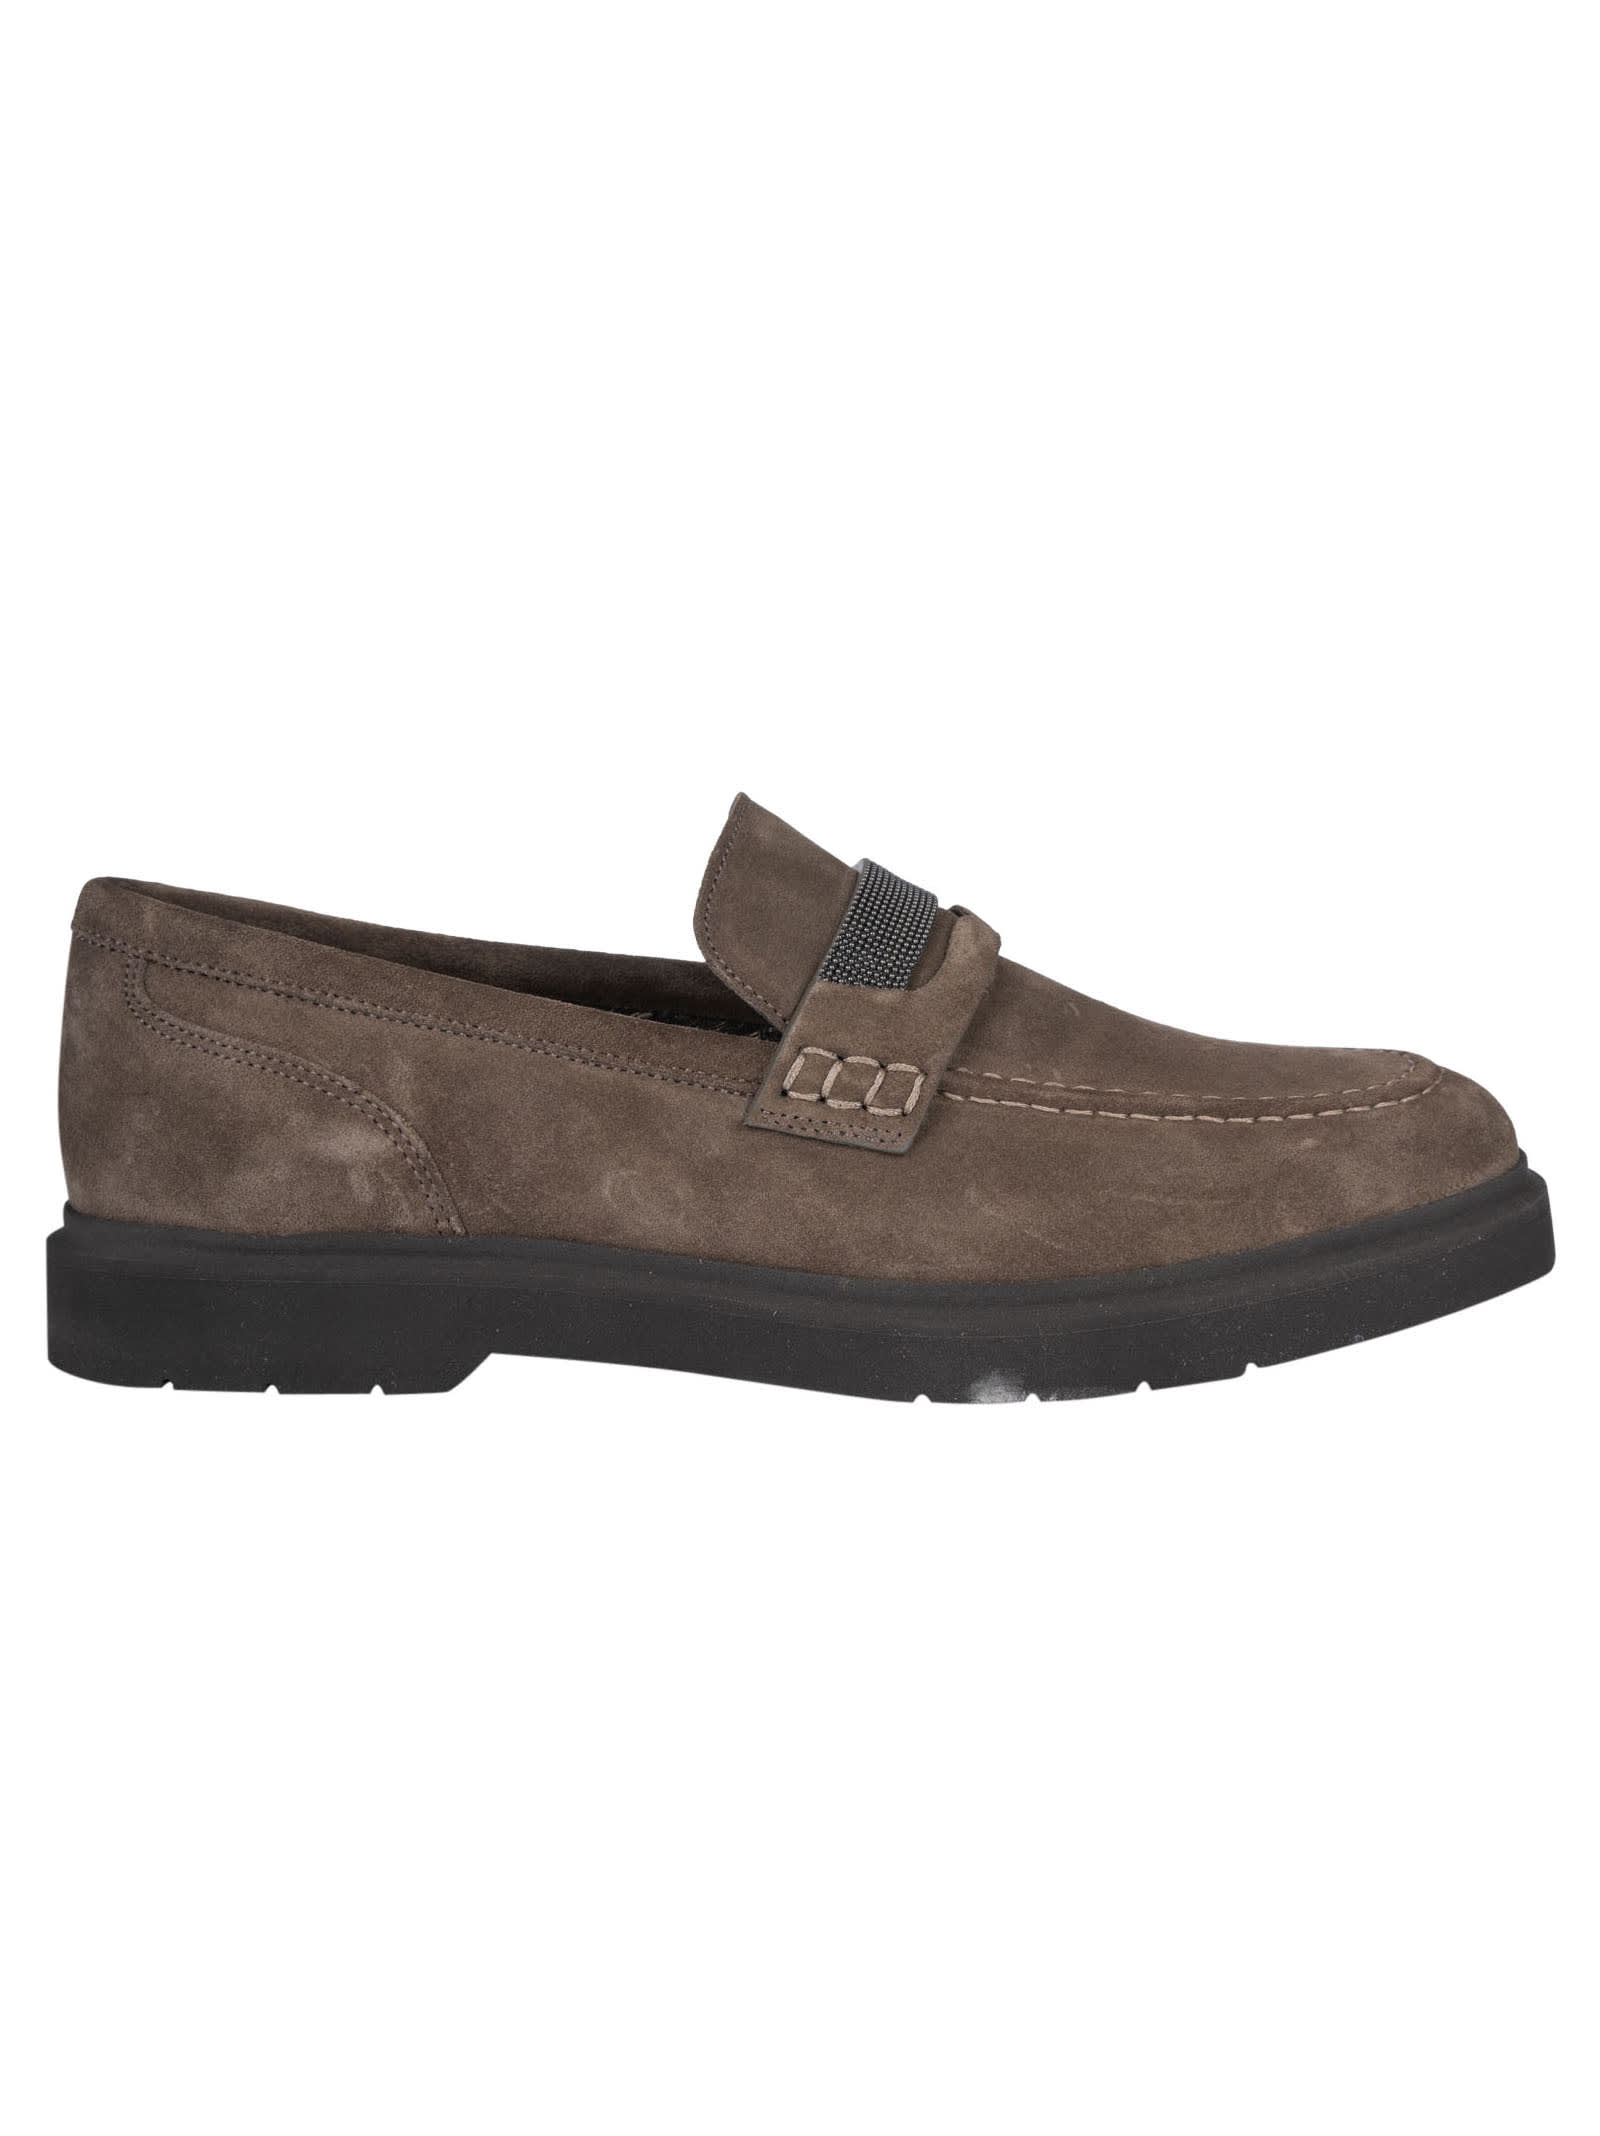 Brunello Cucinelli Bead Embellished Loafers In Brown